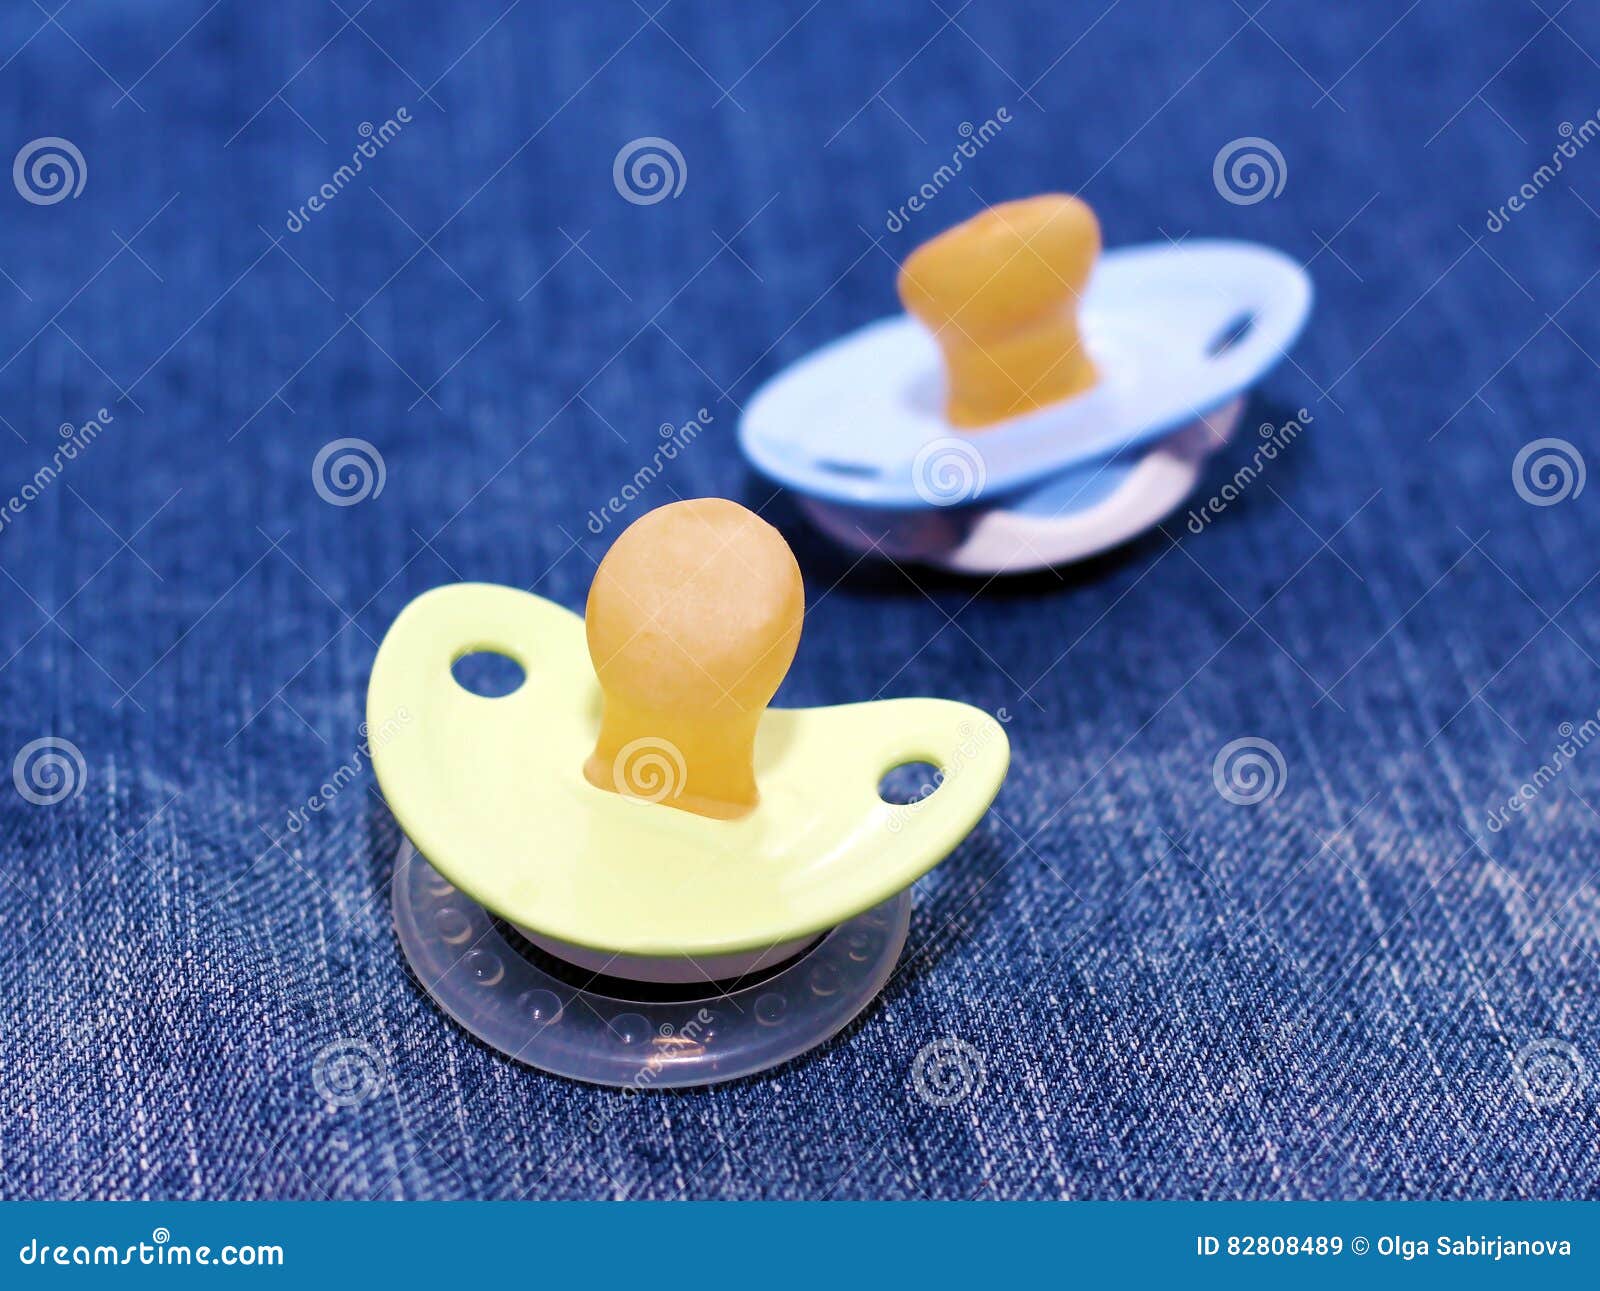 Baby S Pacifies. Toys for Sleep Stock Image - Image of background ...